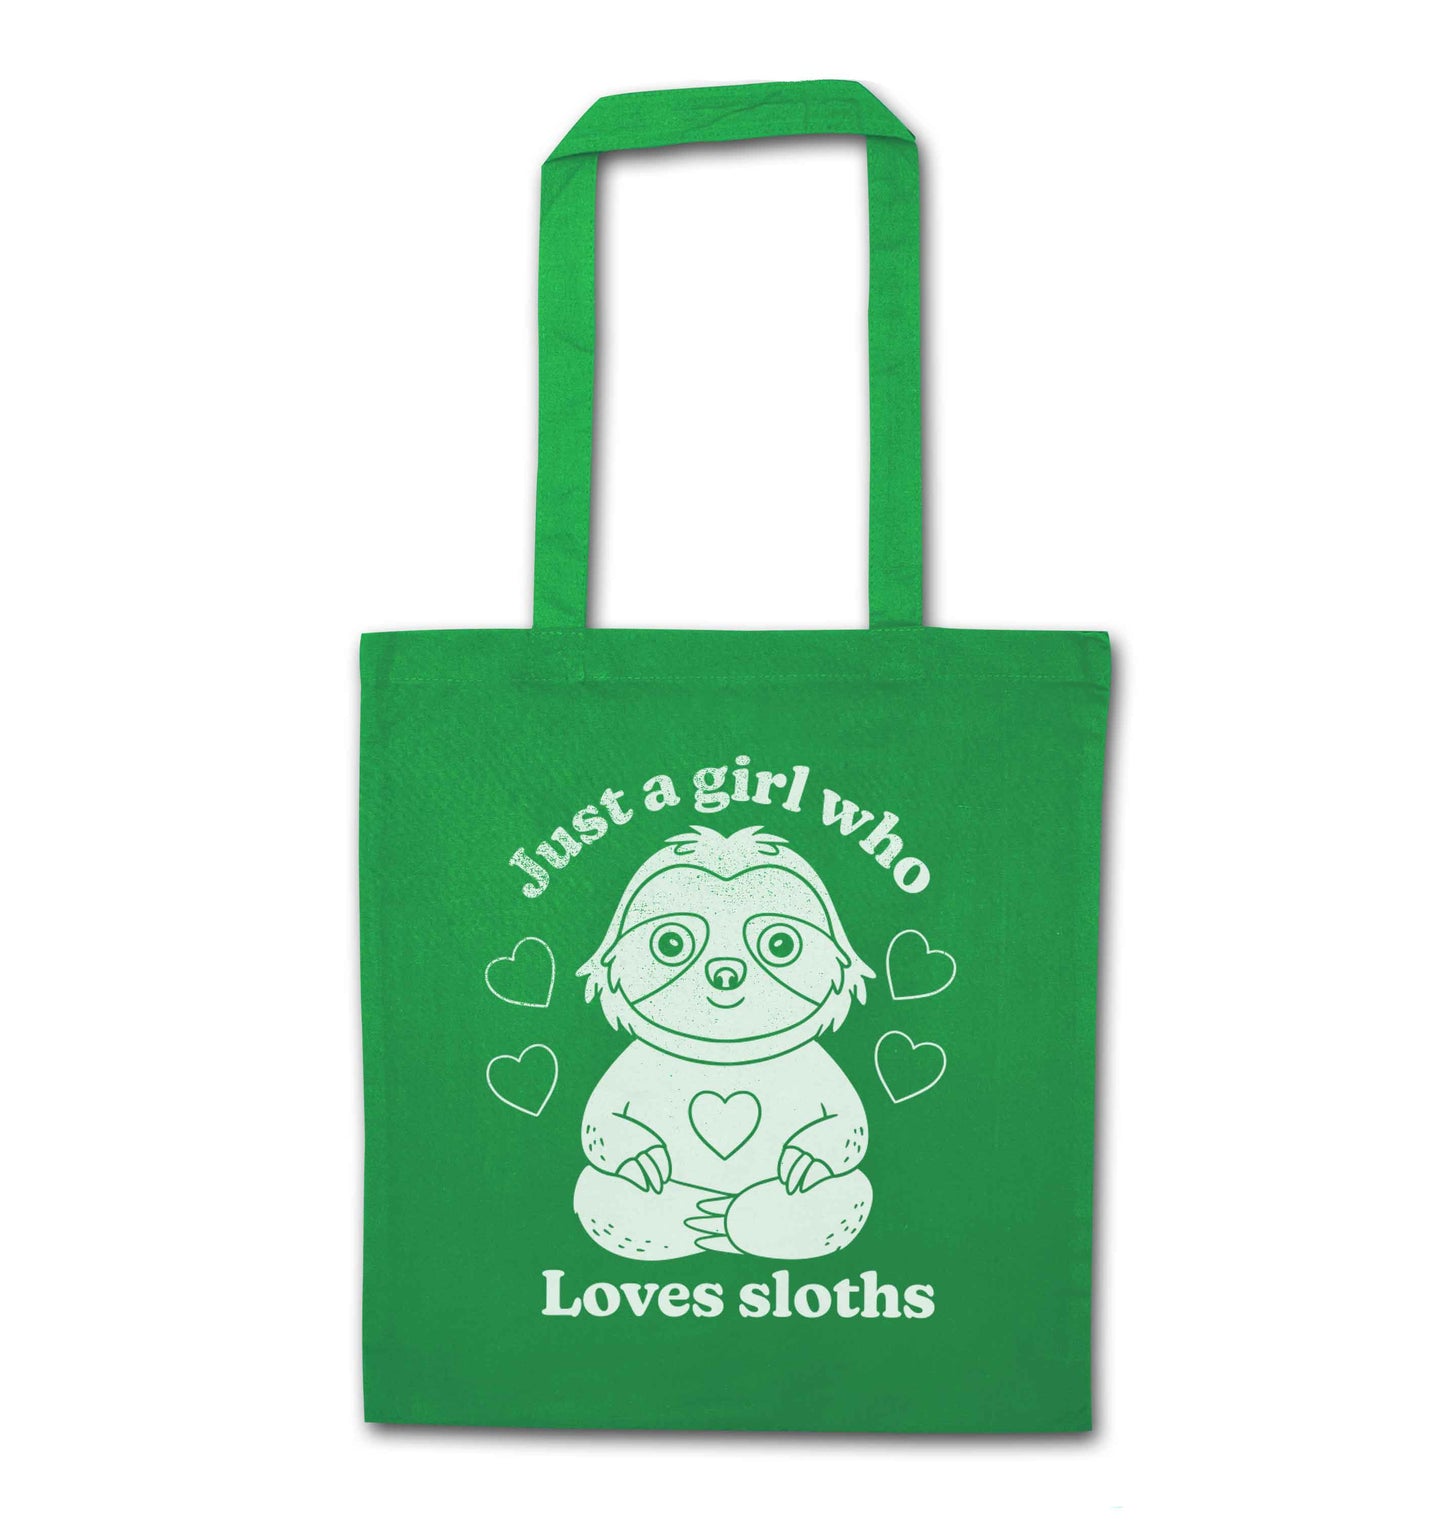 Just a girl who loves sloths green tote bag